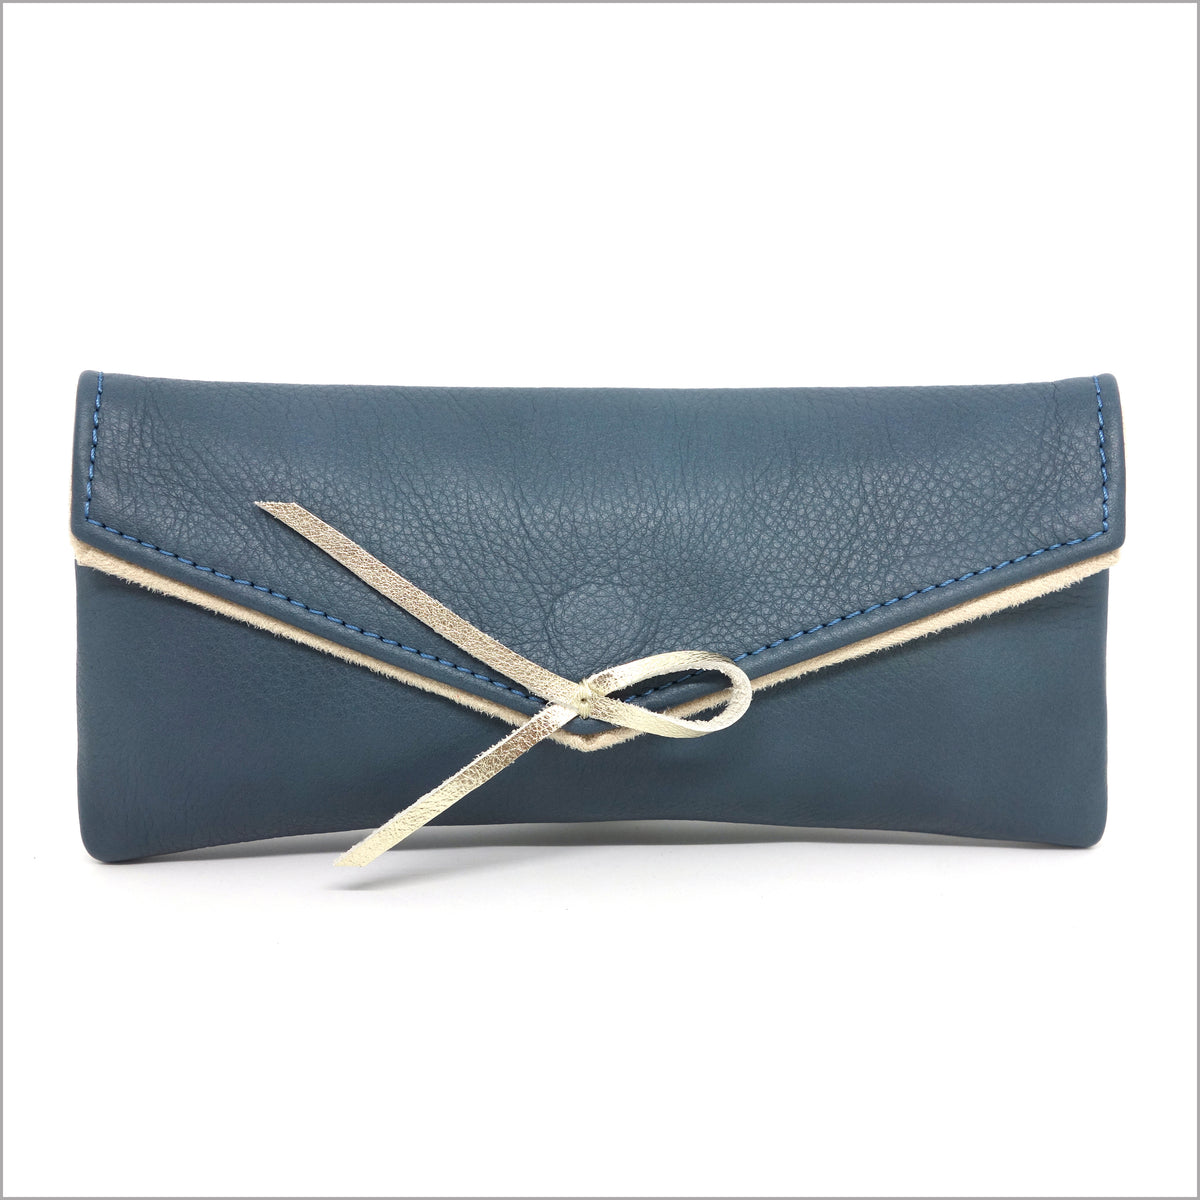 Glasses case in soft slate blue leather